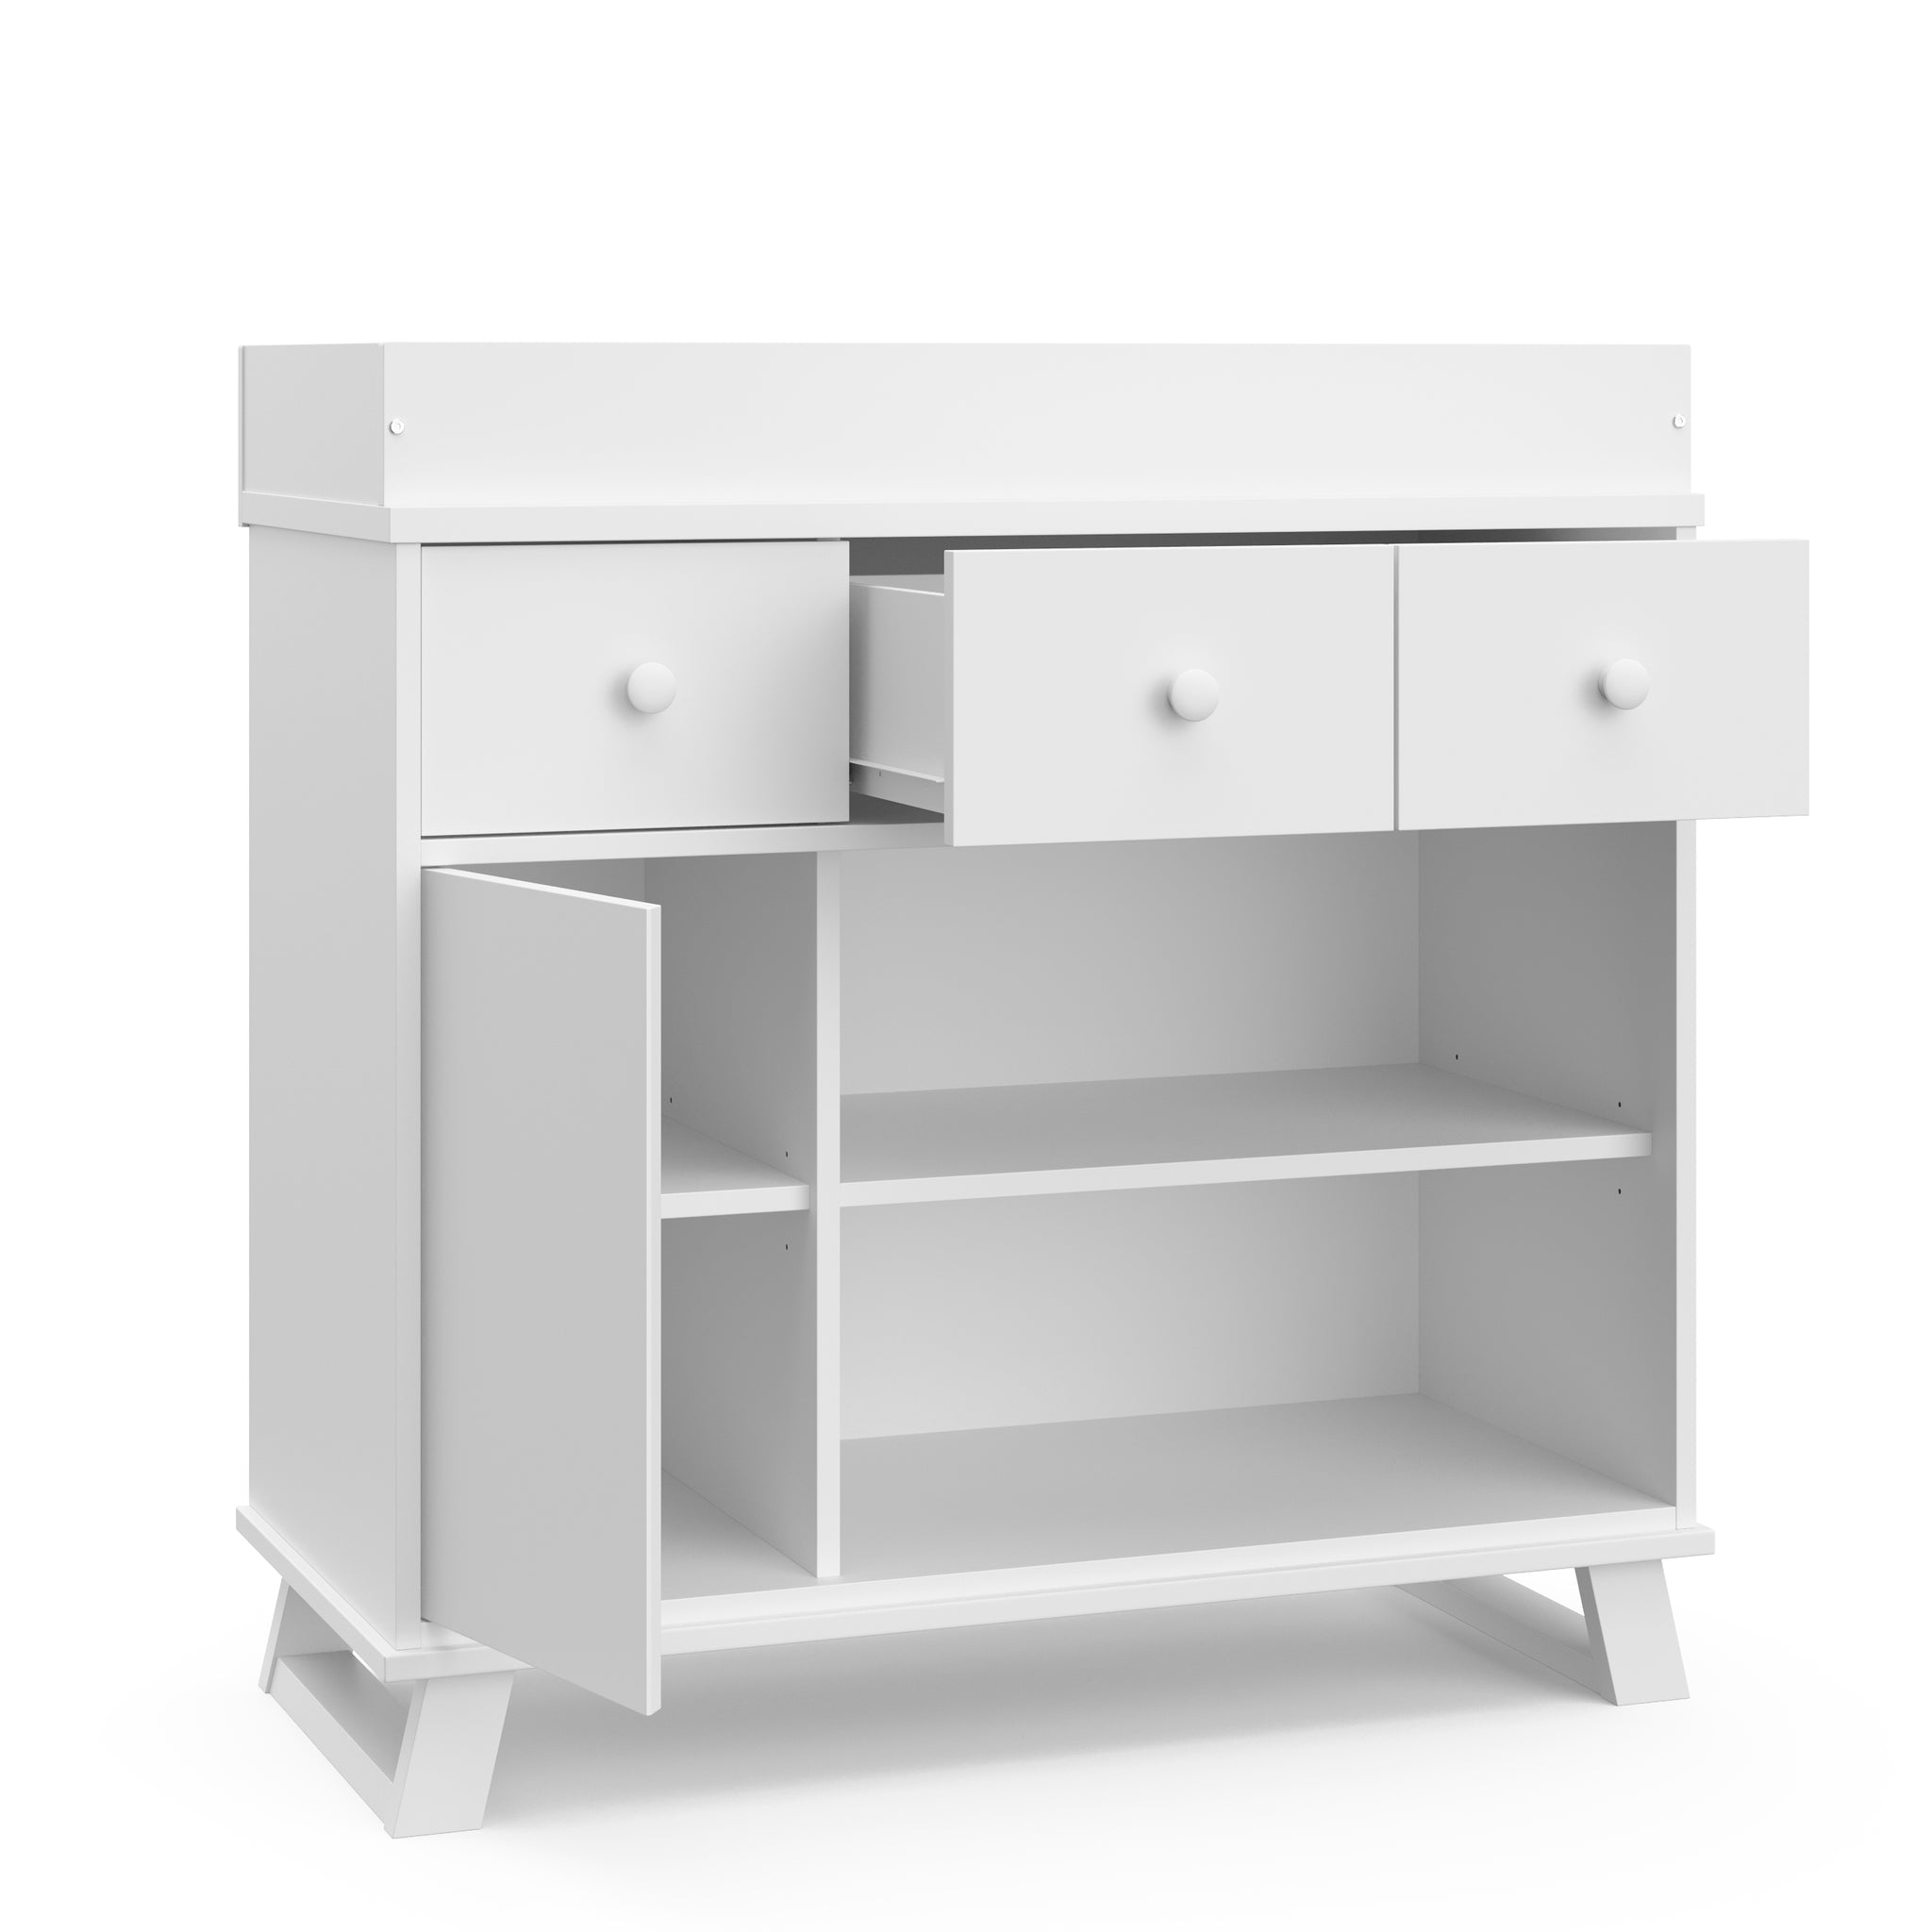 White changing table featuring an open drawer and an open door for convenient storage